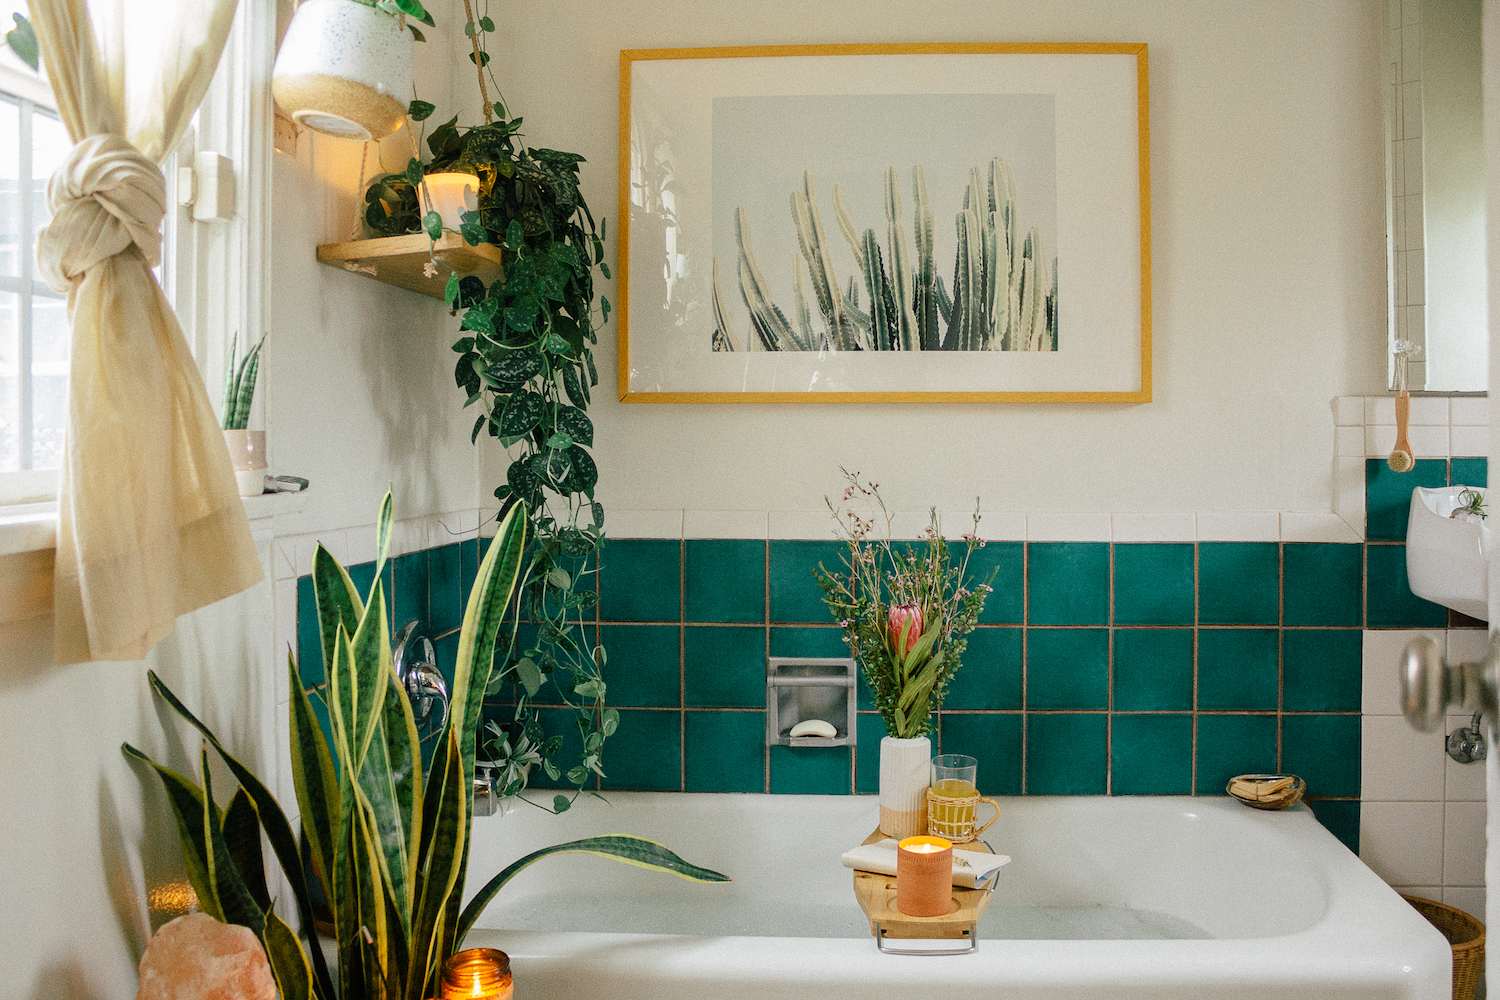 How to Easily Turn Your Bathroom Into an At-Home Spa Oasis - Society6 Blog